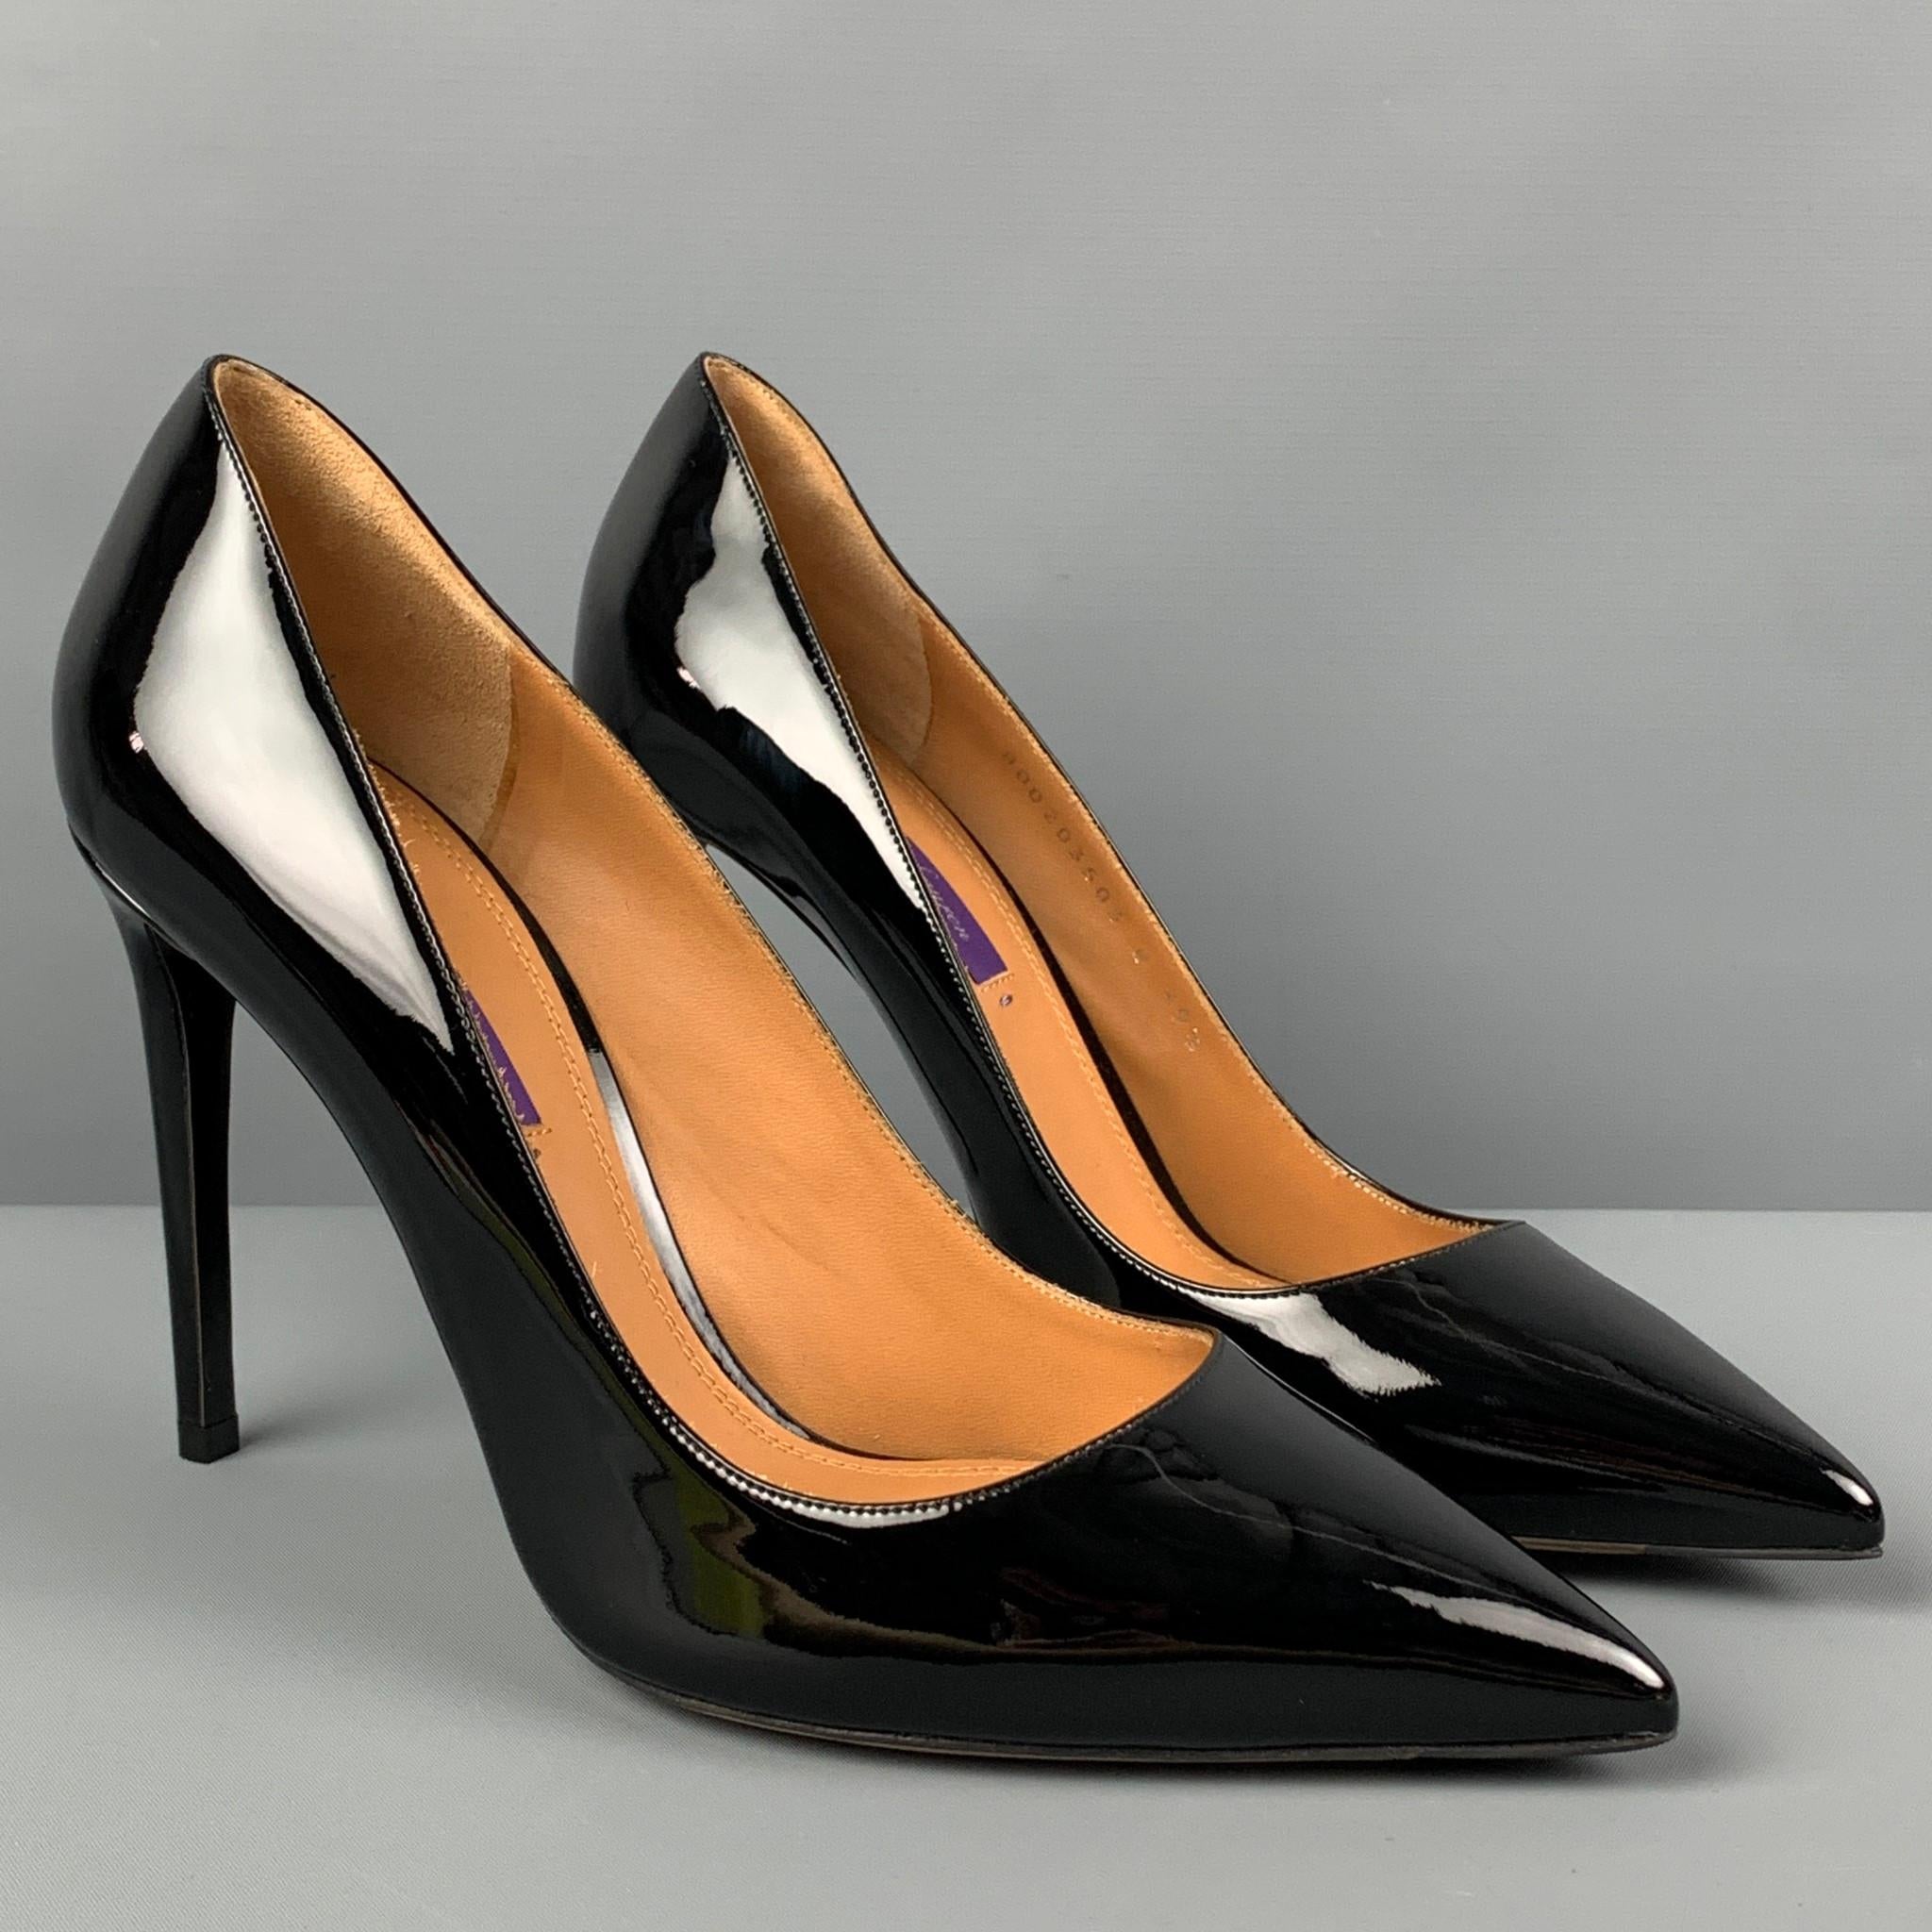 RALPH LAUREN Collection 'Celia' pumps comes in a black patent leather featuring a pointed toe and a stiletto heel. Made in Italy. 

New With Box. 
Marked: 39.5 B
Original Retail Price: $675.00

Measurements:

Heel: 4.25 in. 